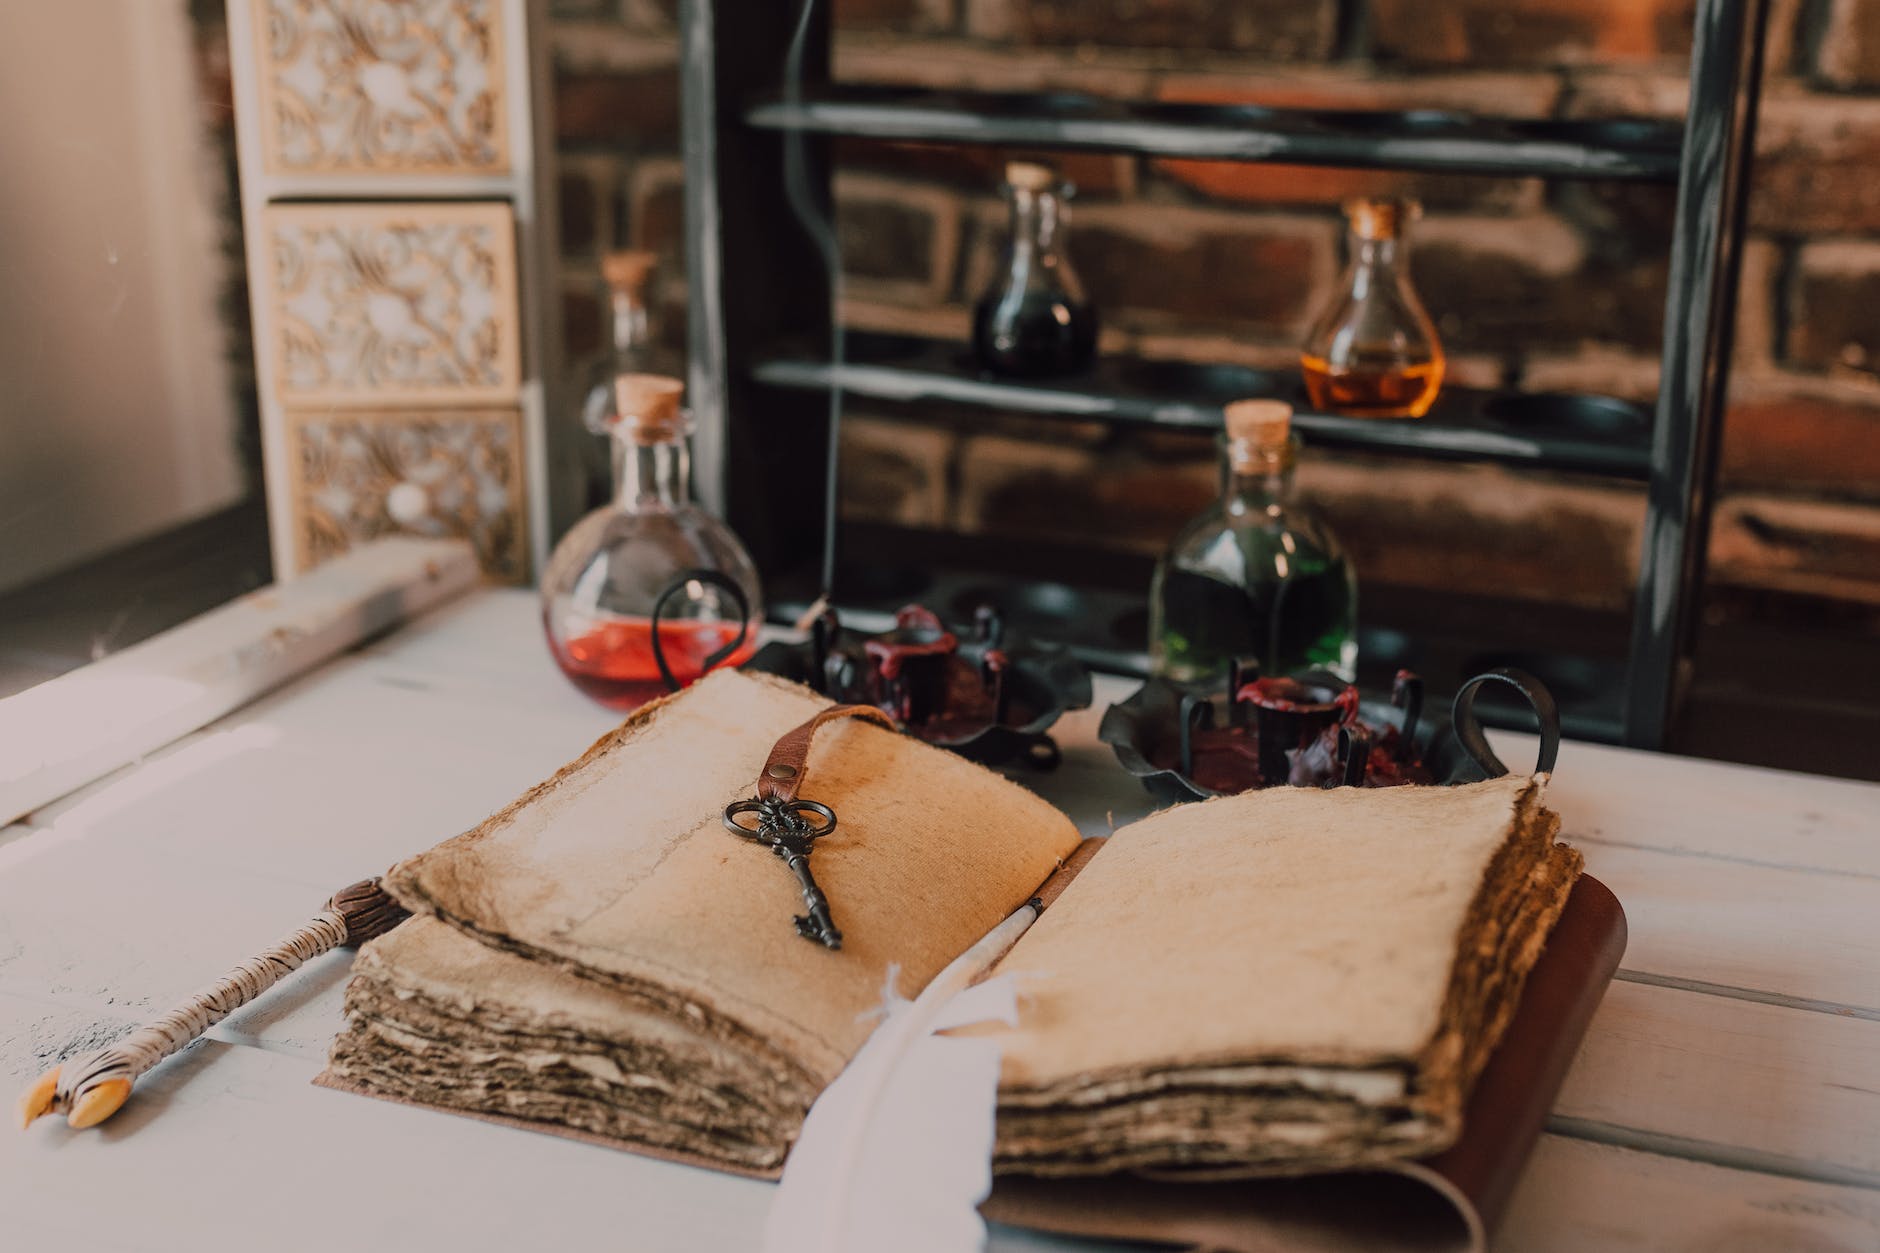 an old book and candles on wooden table with glass bottles